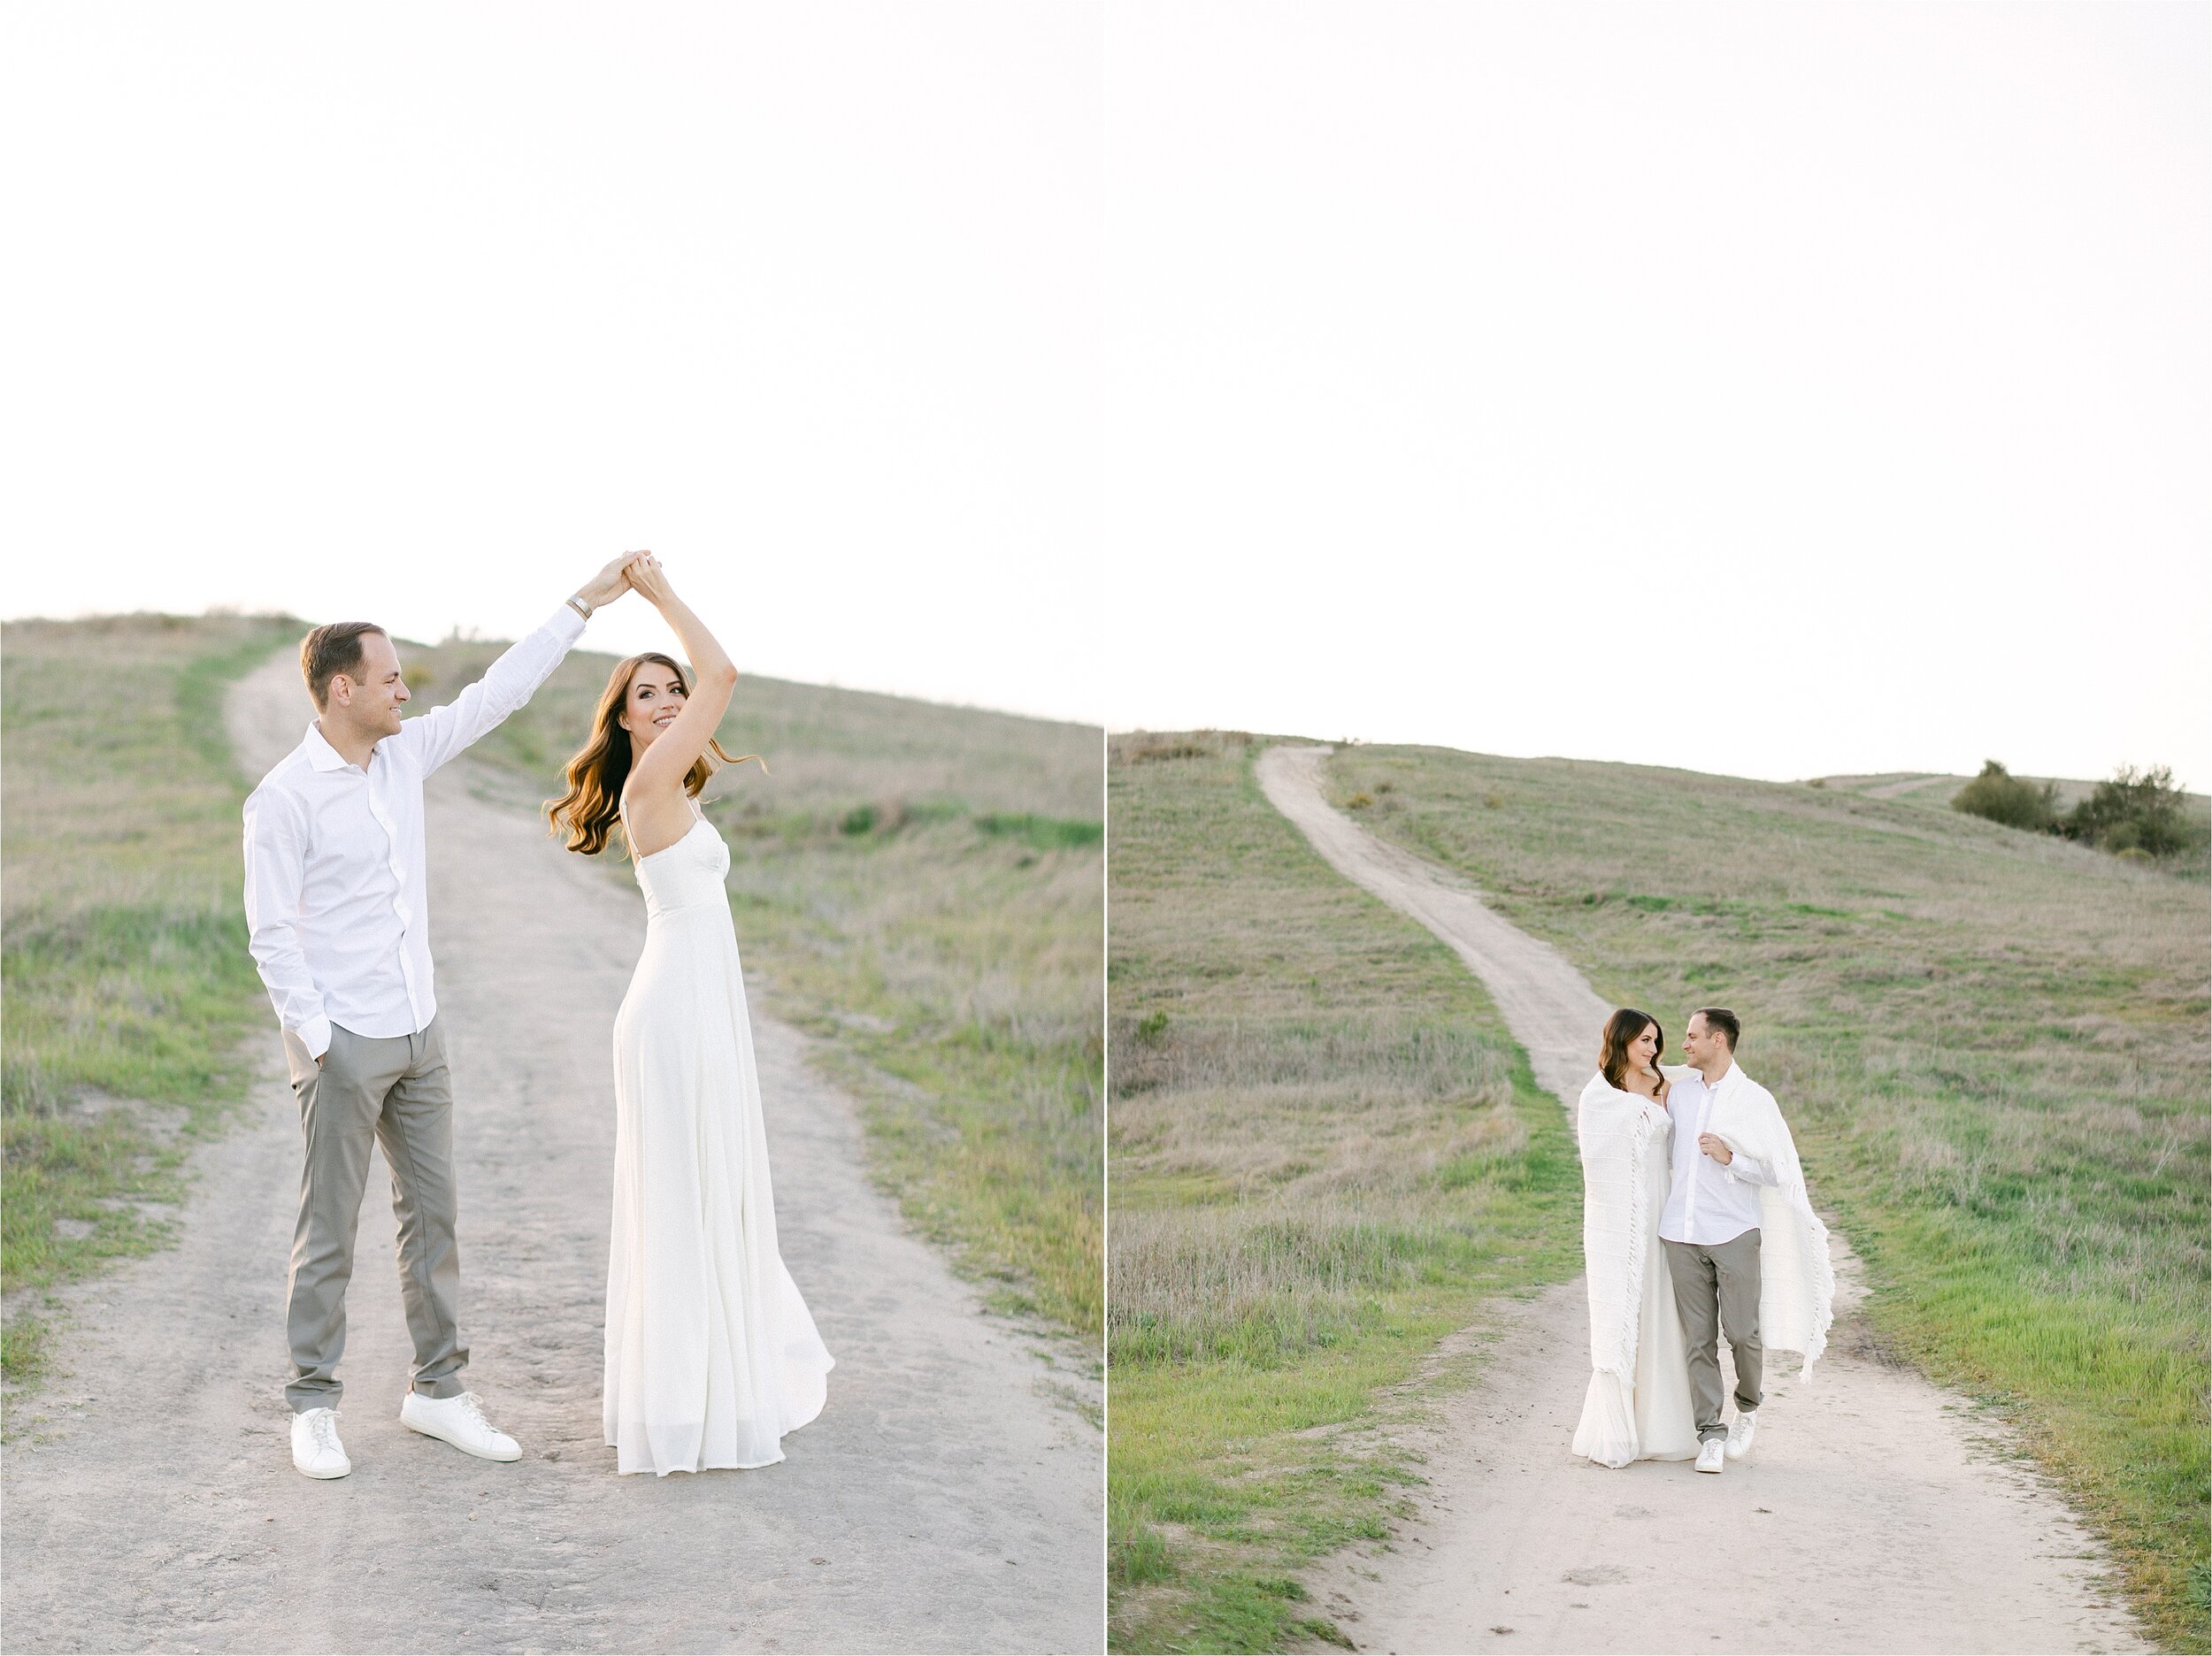 A Brunette man wearing grey pants and a white button down twirls his fiance wearing white chiffon dress during their Orange County engagement photography session.